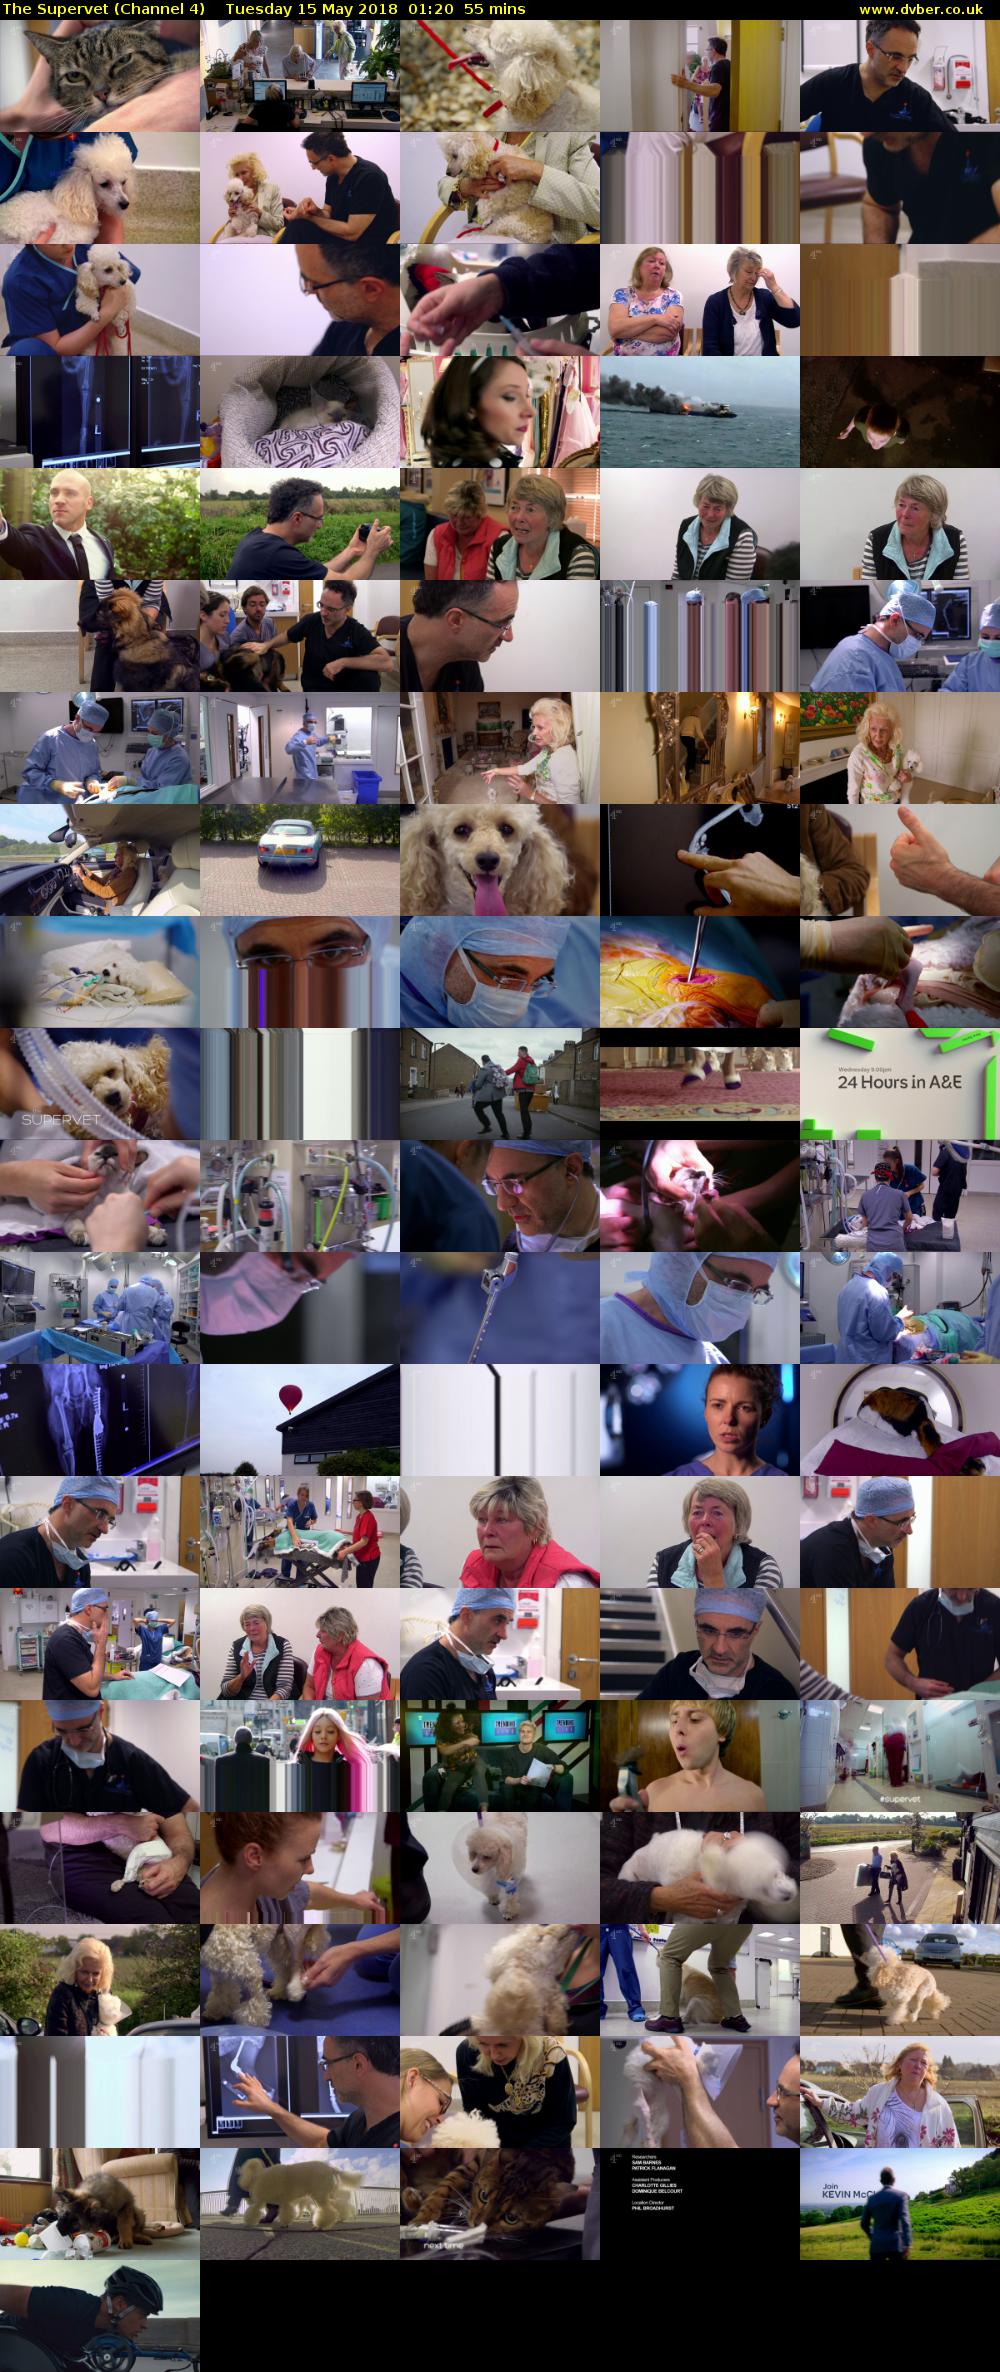 The Supervet (Channel 4) Tuesday 15 May 2018 01:20 - 02:15